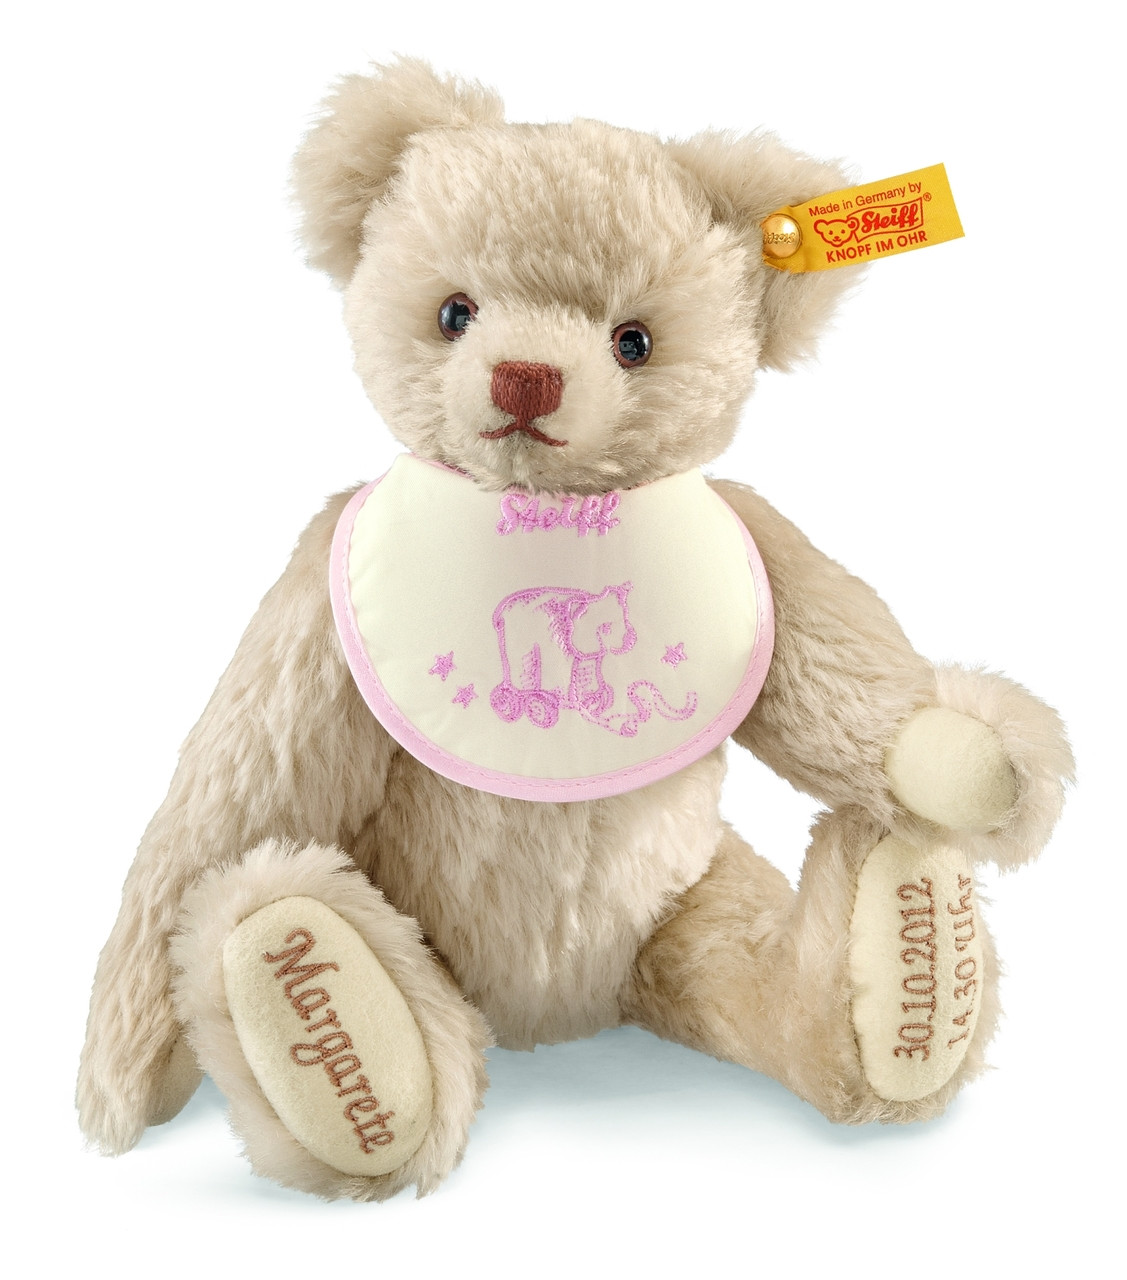 personalized teddy bears for babies